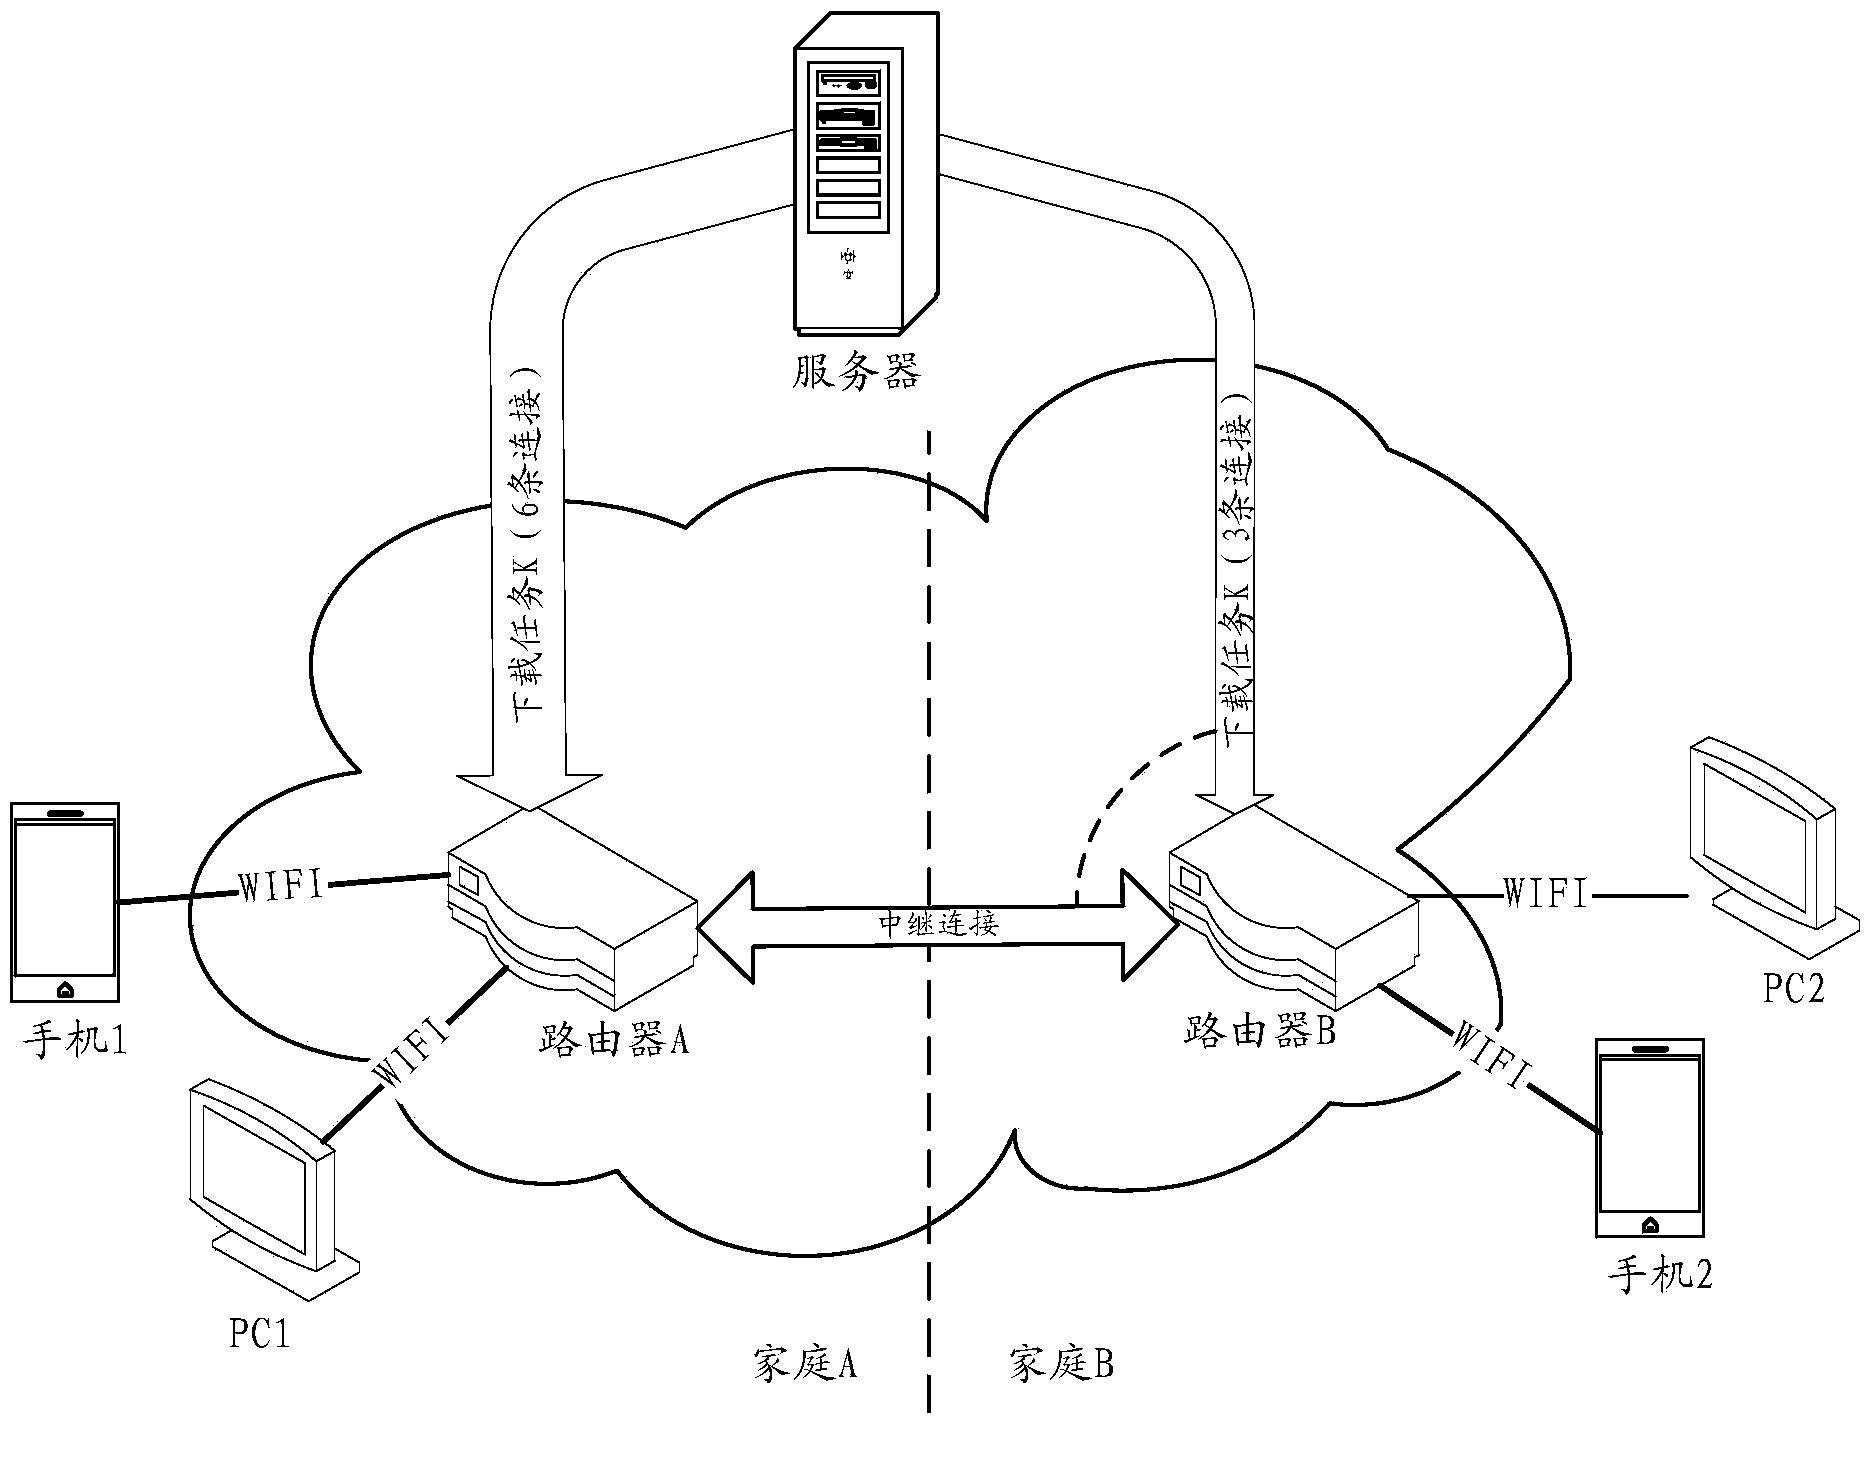 Method and device for network access